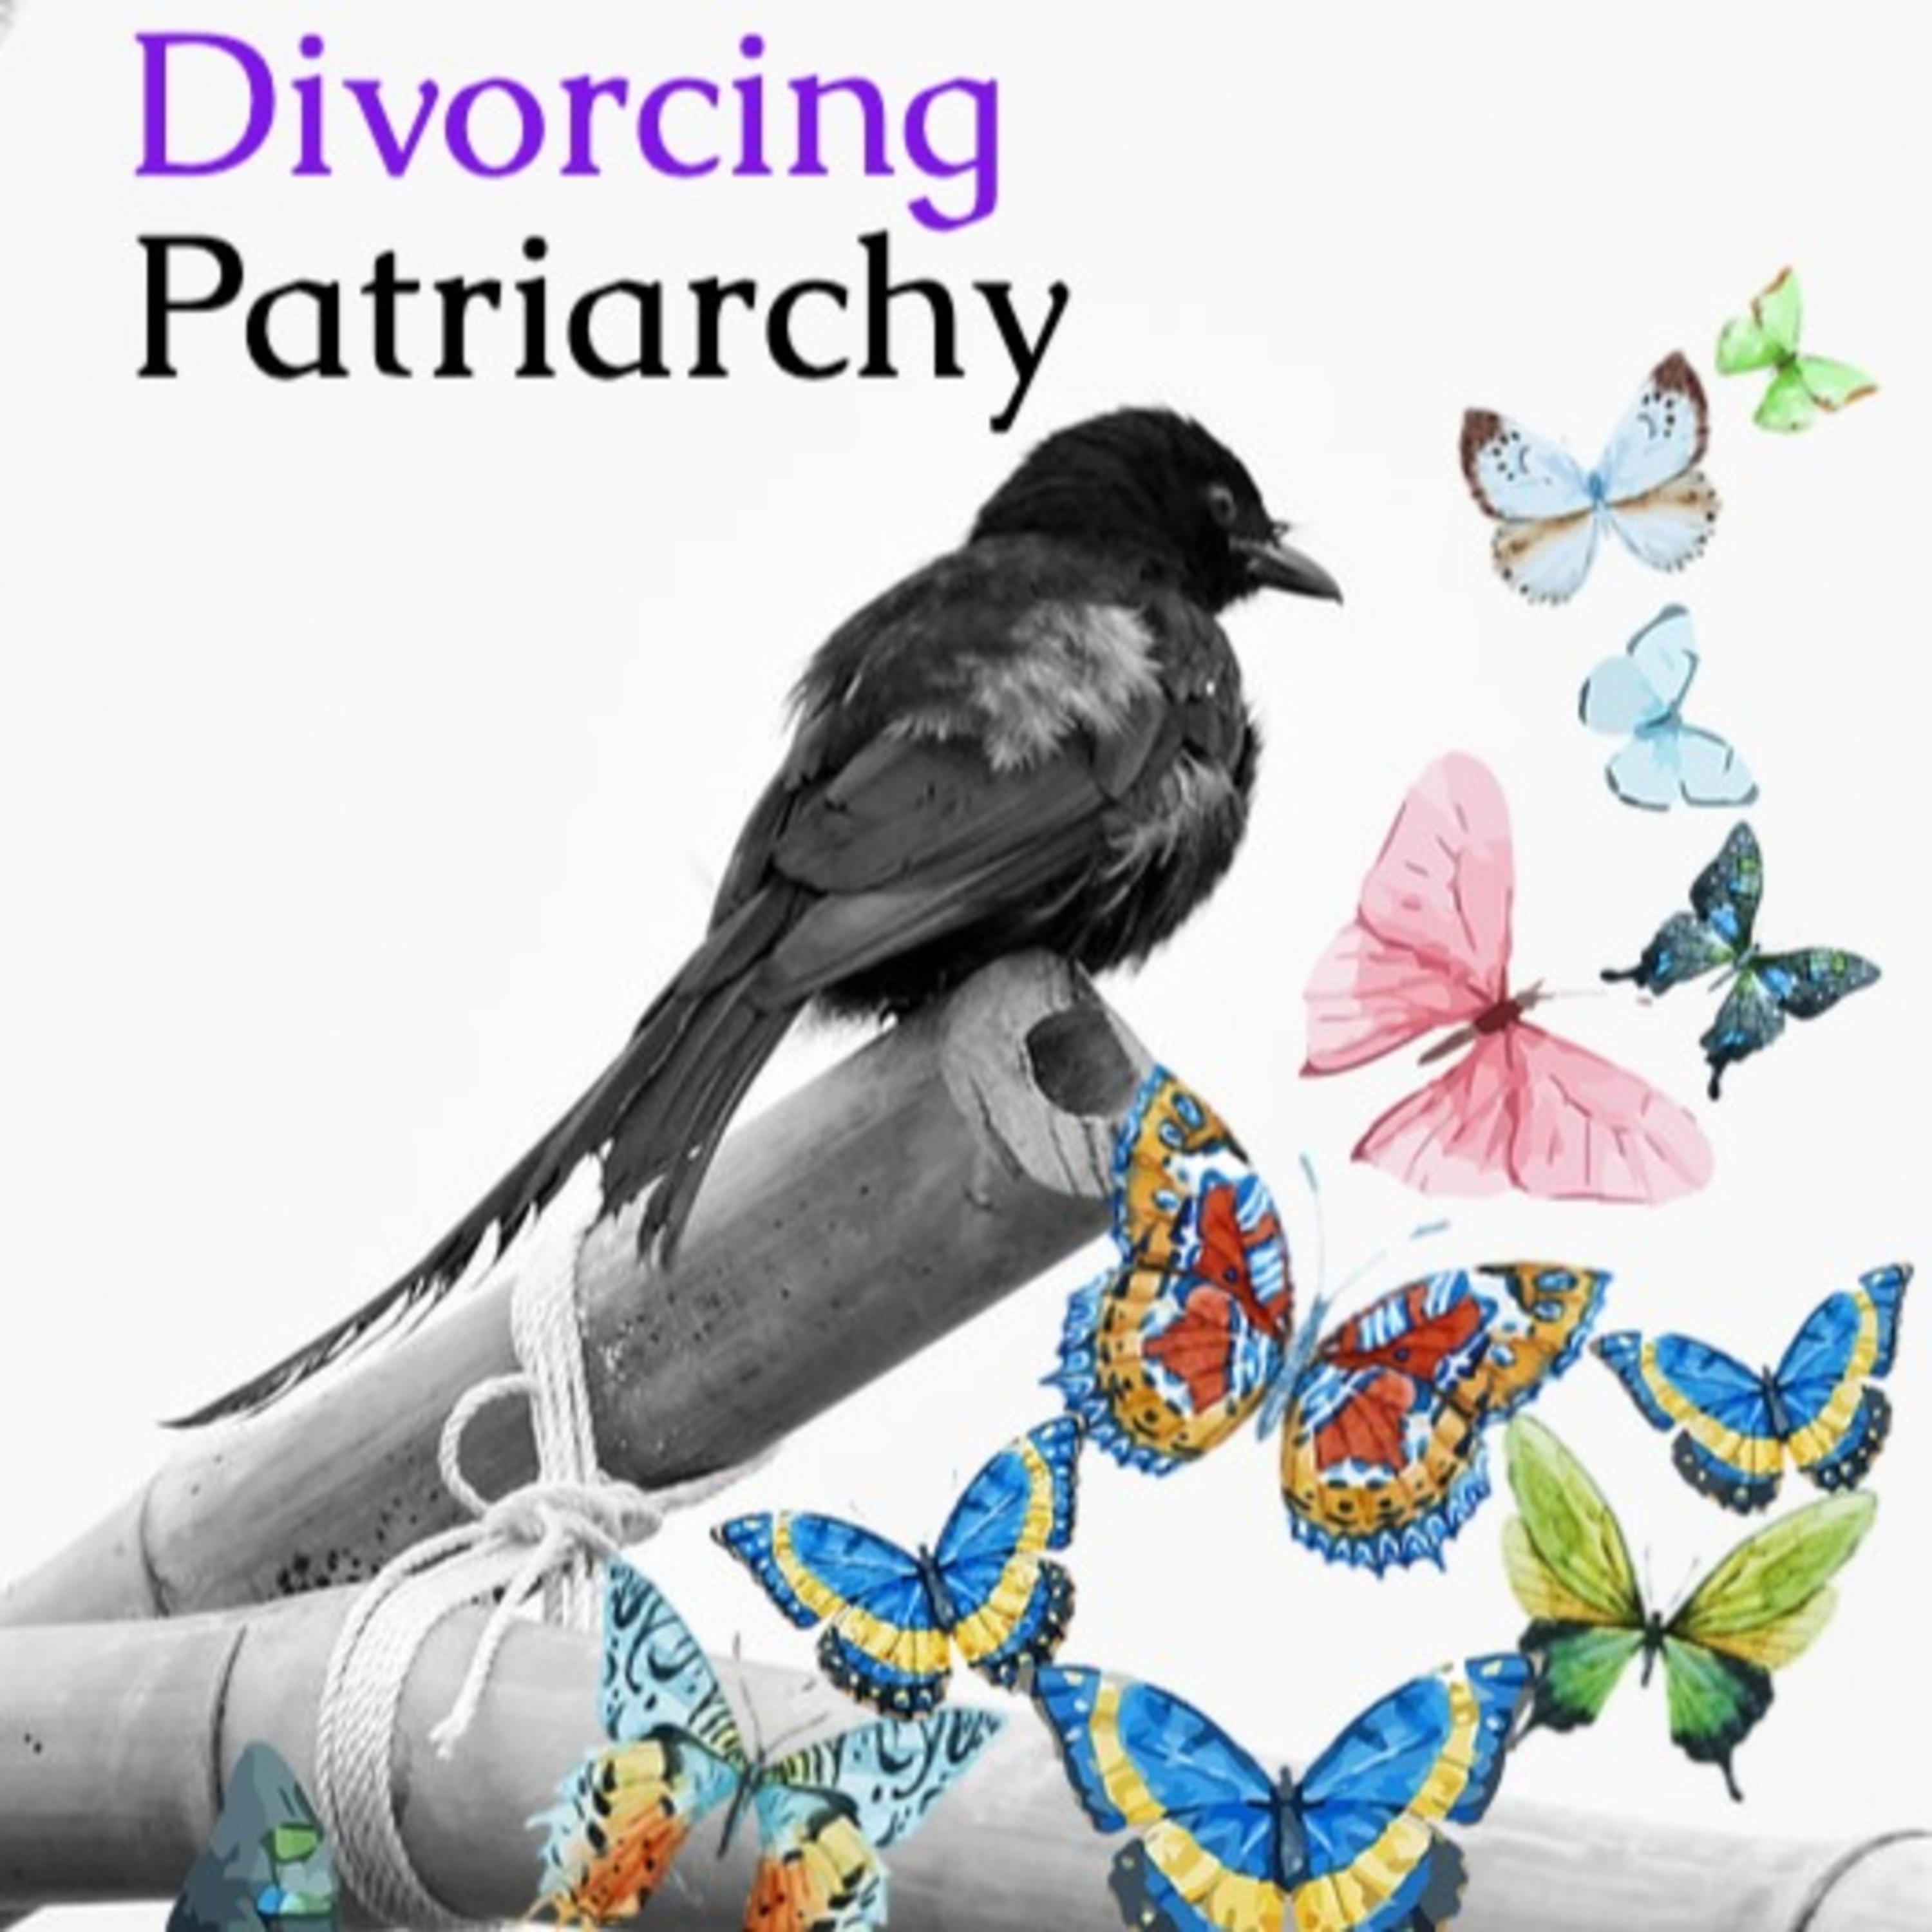 Fresh update on "district attorney" discussed on DIVORCING PATRIARCHY